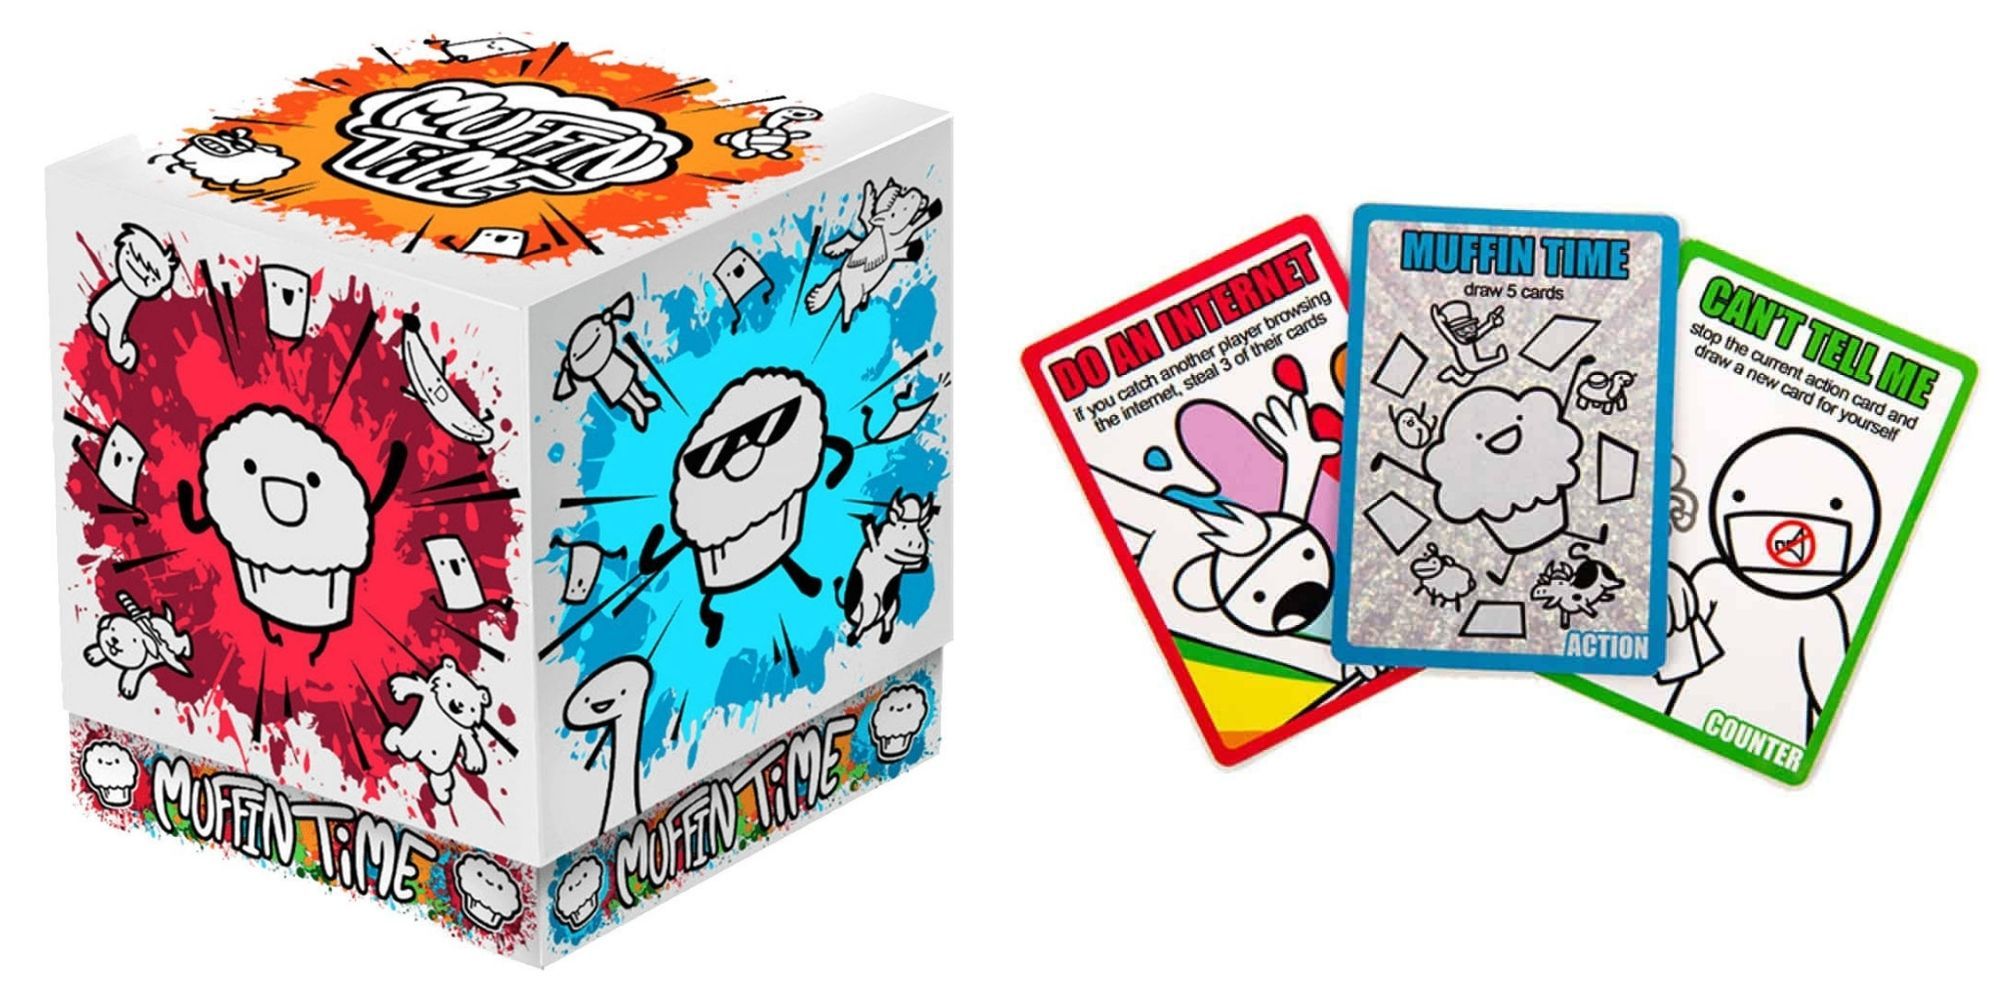 Muffin Time - Card Game Box - Example action and counter cards